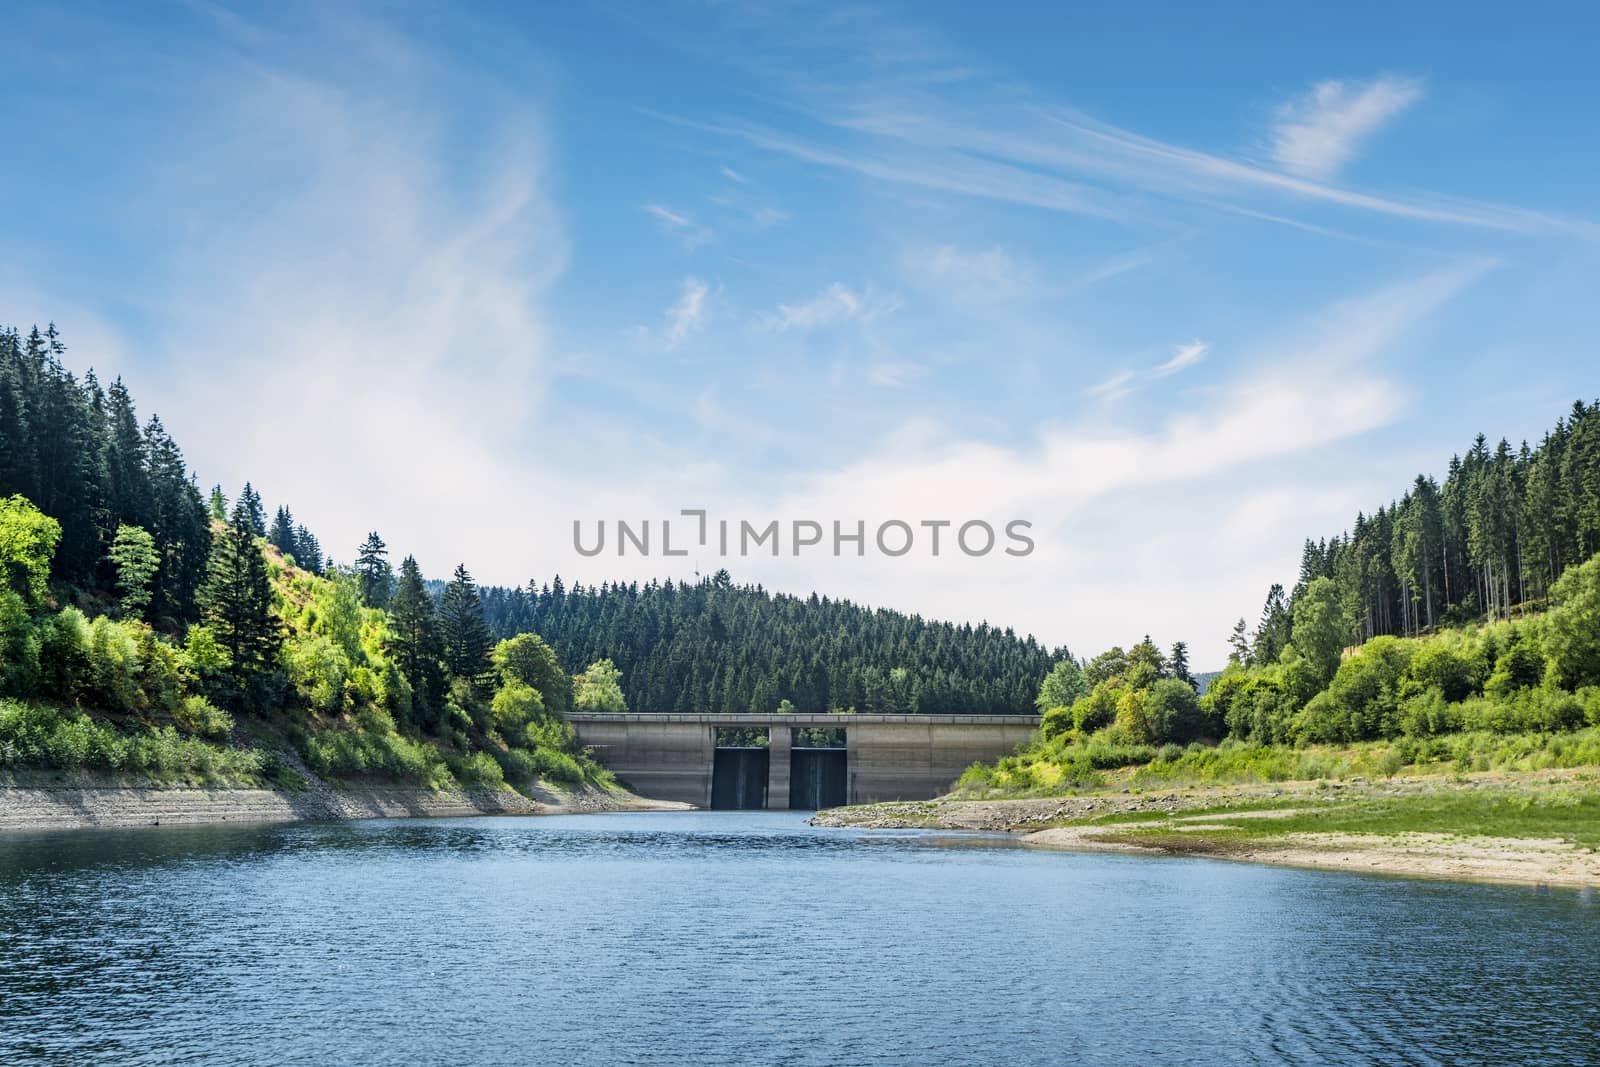 Dam in a colorful landscape in the summer on a lake surrounded by forest